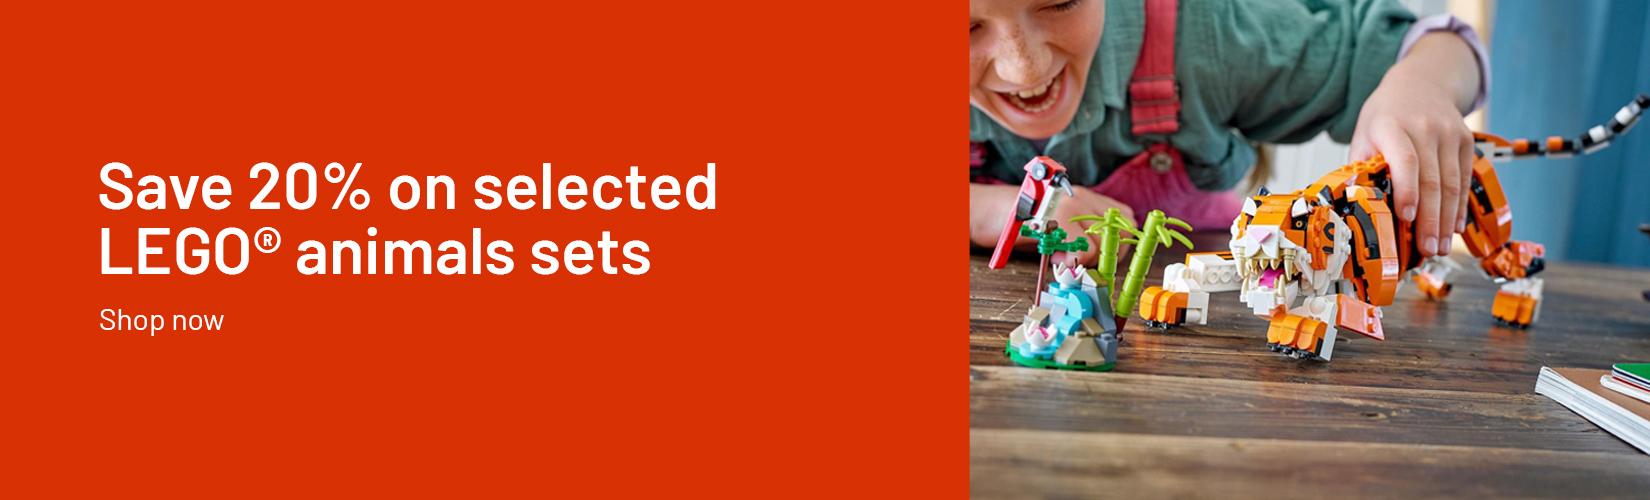 Save 20% on selected LEGO® animals sets. Shop now.